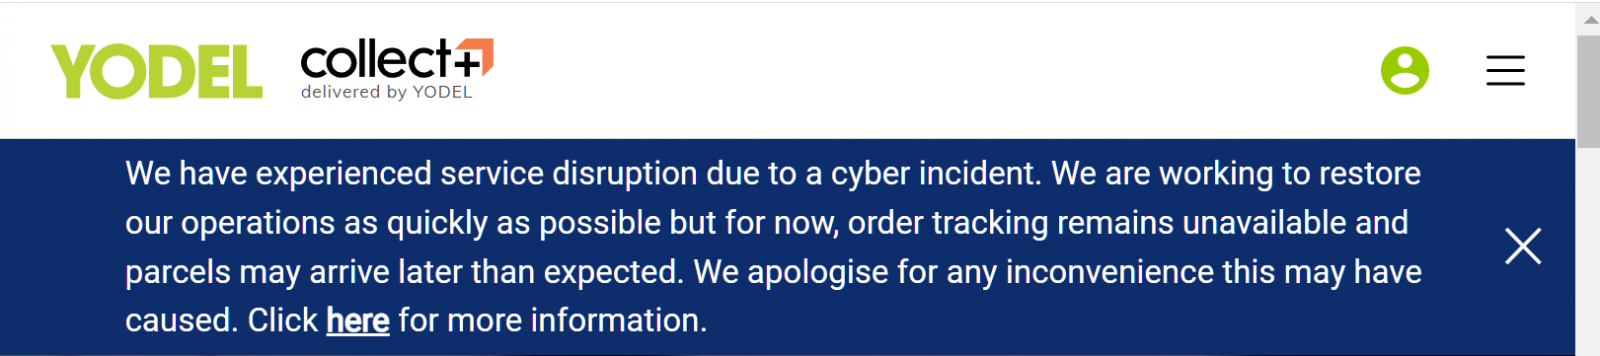 Yodel banner informing of cyberattack